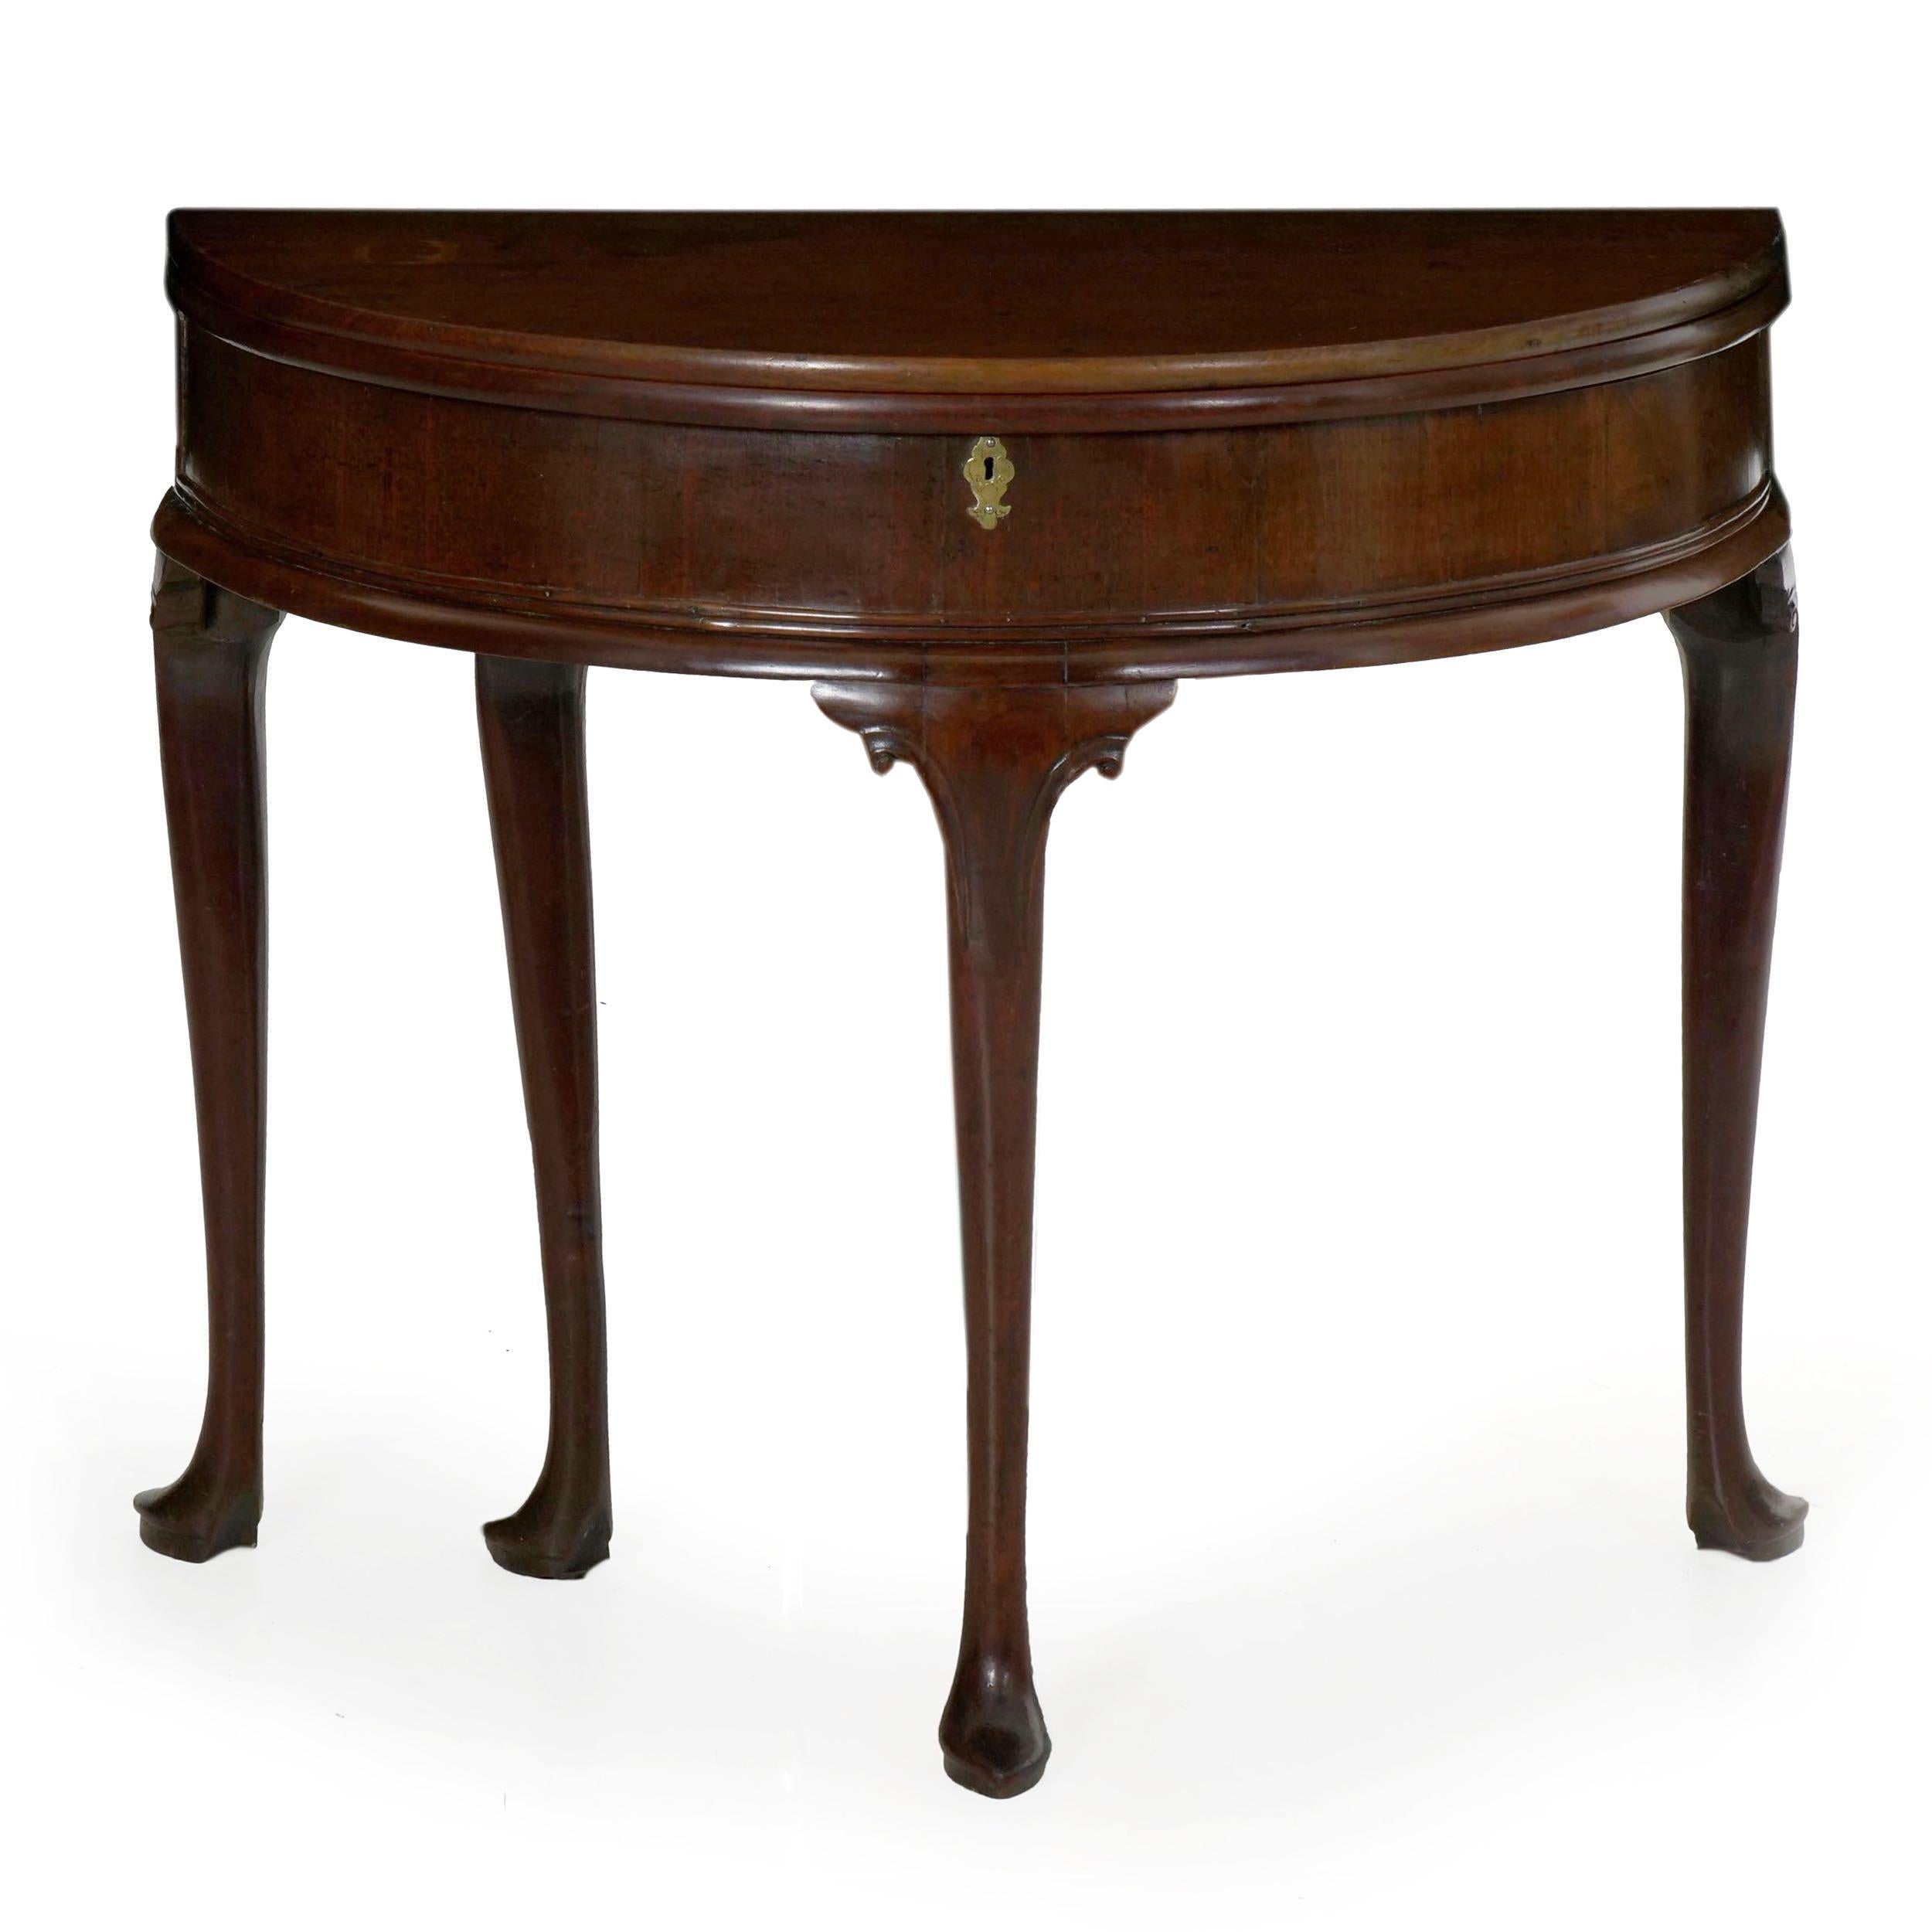 This fine untouched gem is in every way a convenient console table - the demilune shape of the front allows it to be positioned in active hallways without fear of catching corners, while at the same time allowing it to transform into a full circular